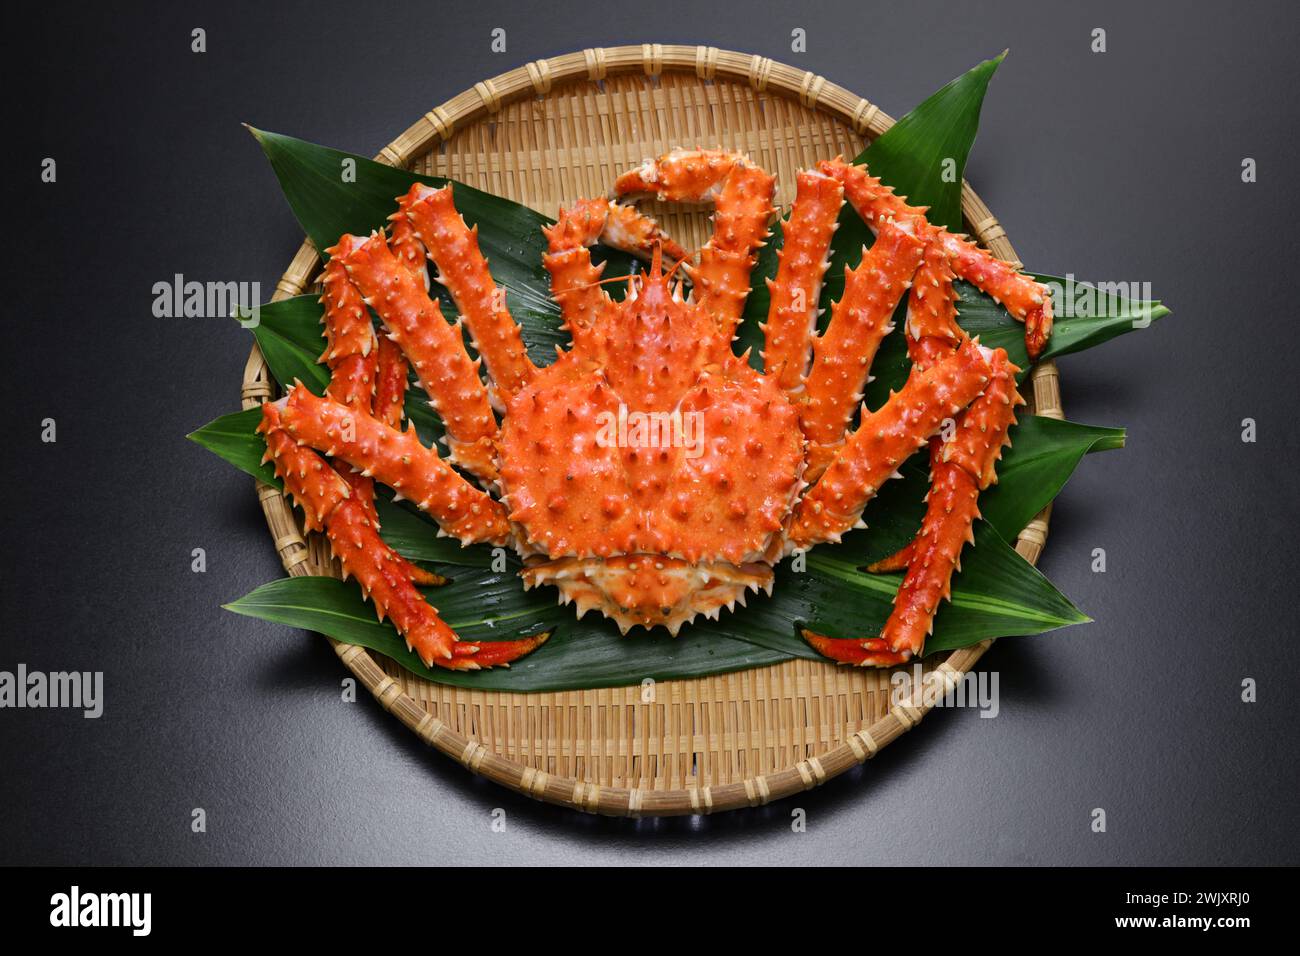 boiled red king crab on a bamboo tray Stock Photo